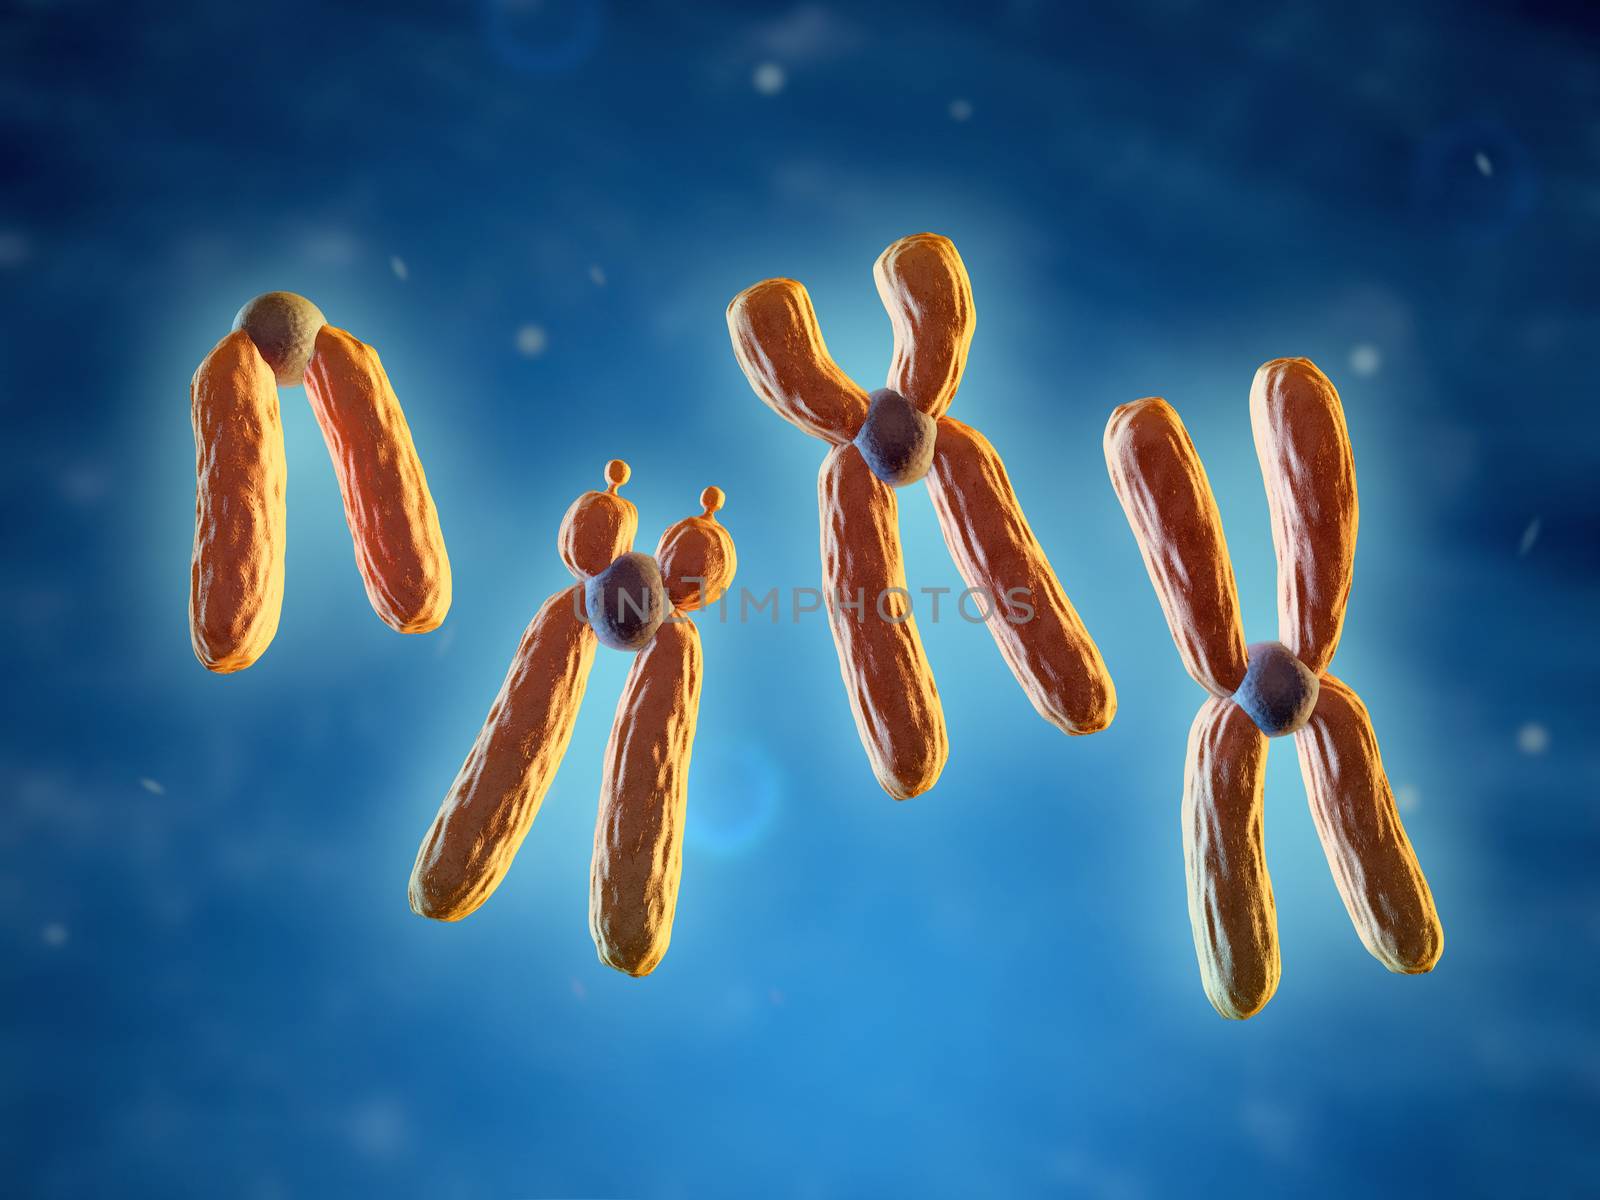 Classification of chromosomes, based on the position of centromere. 3D illustration.